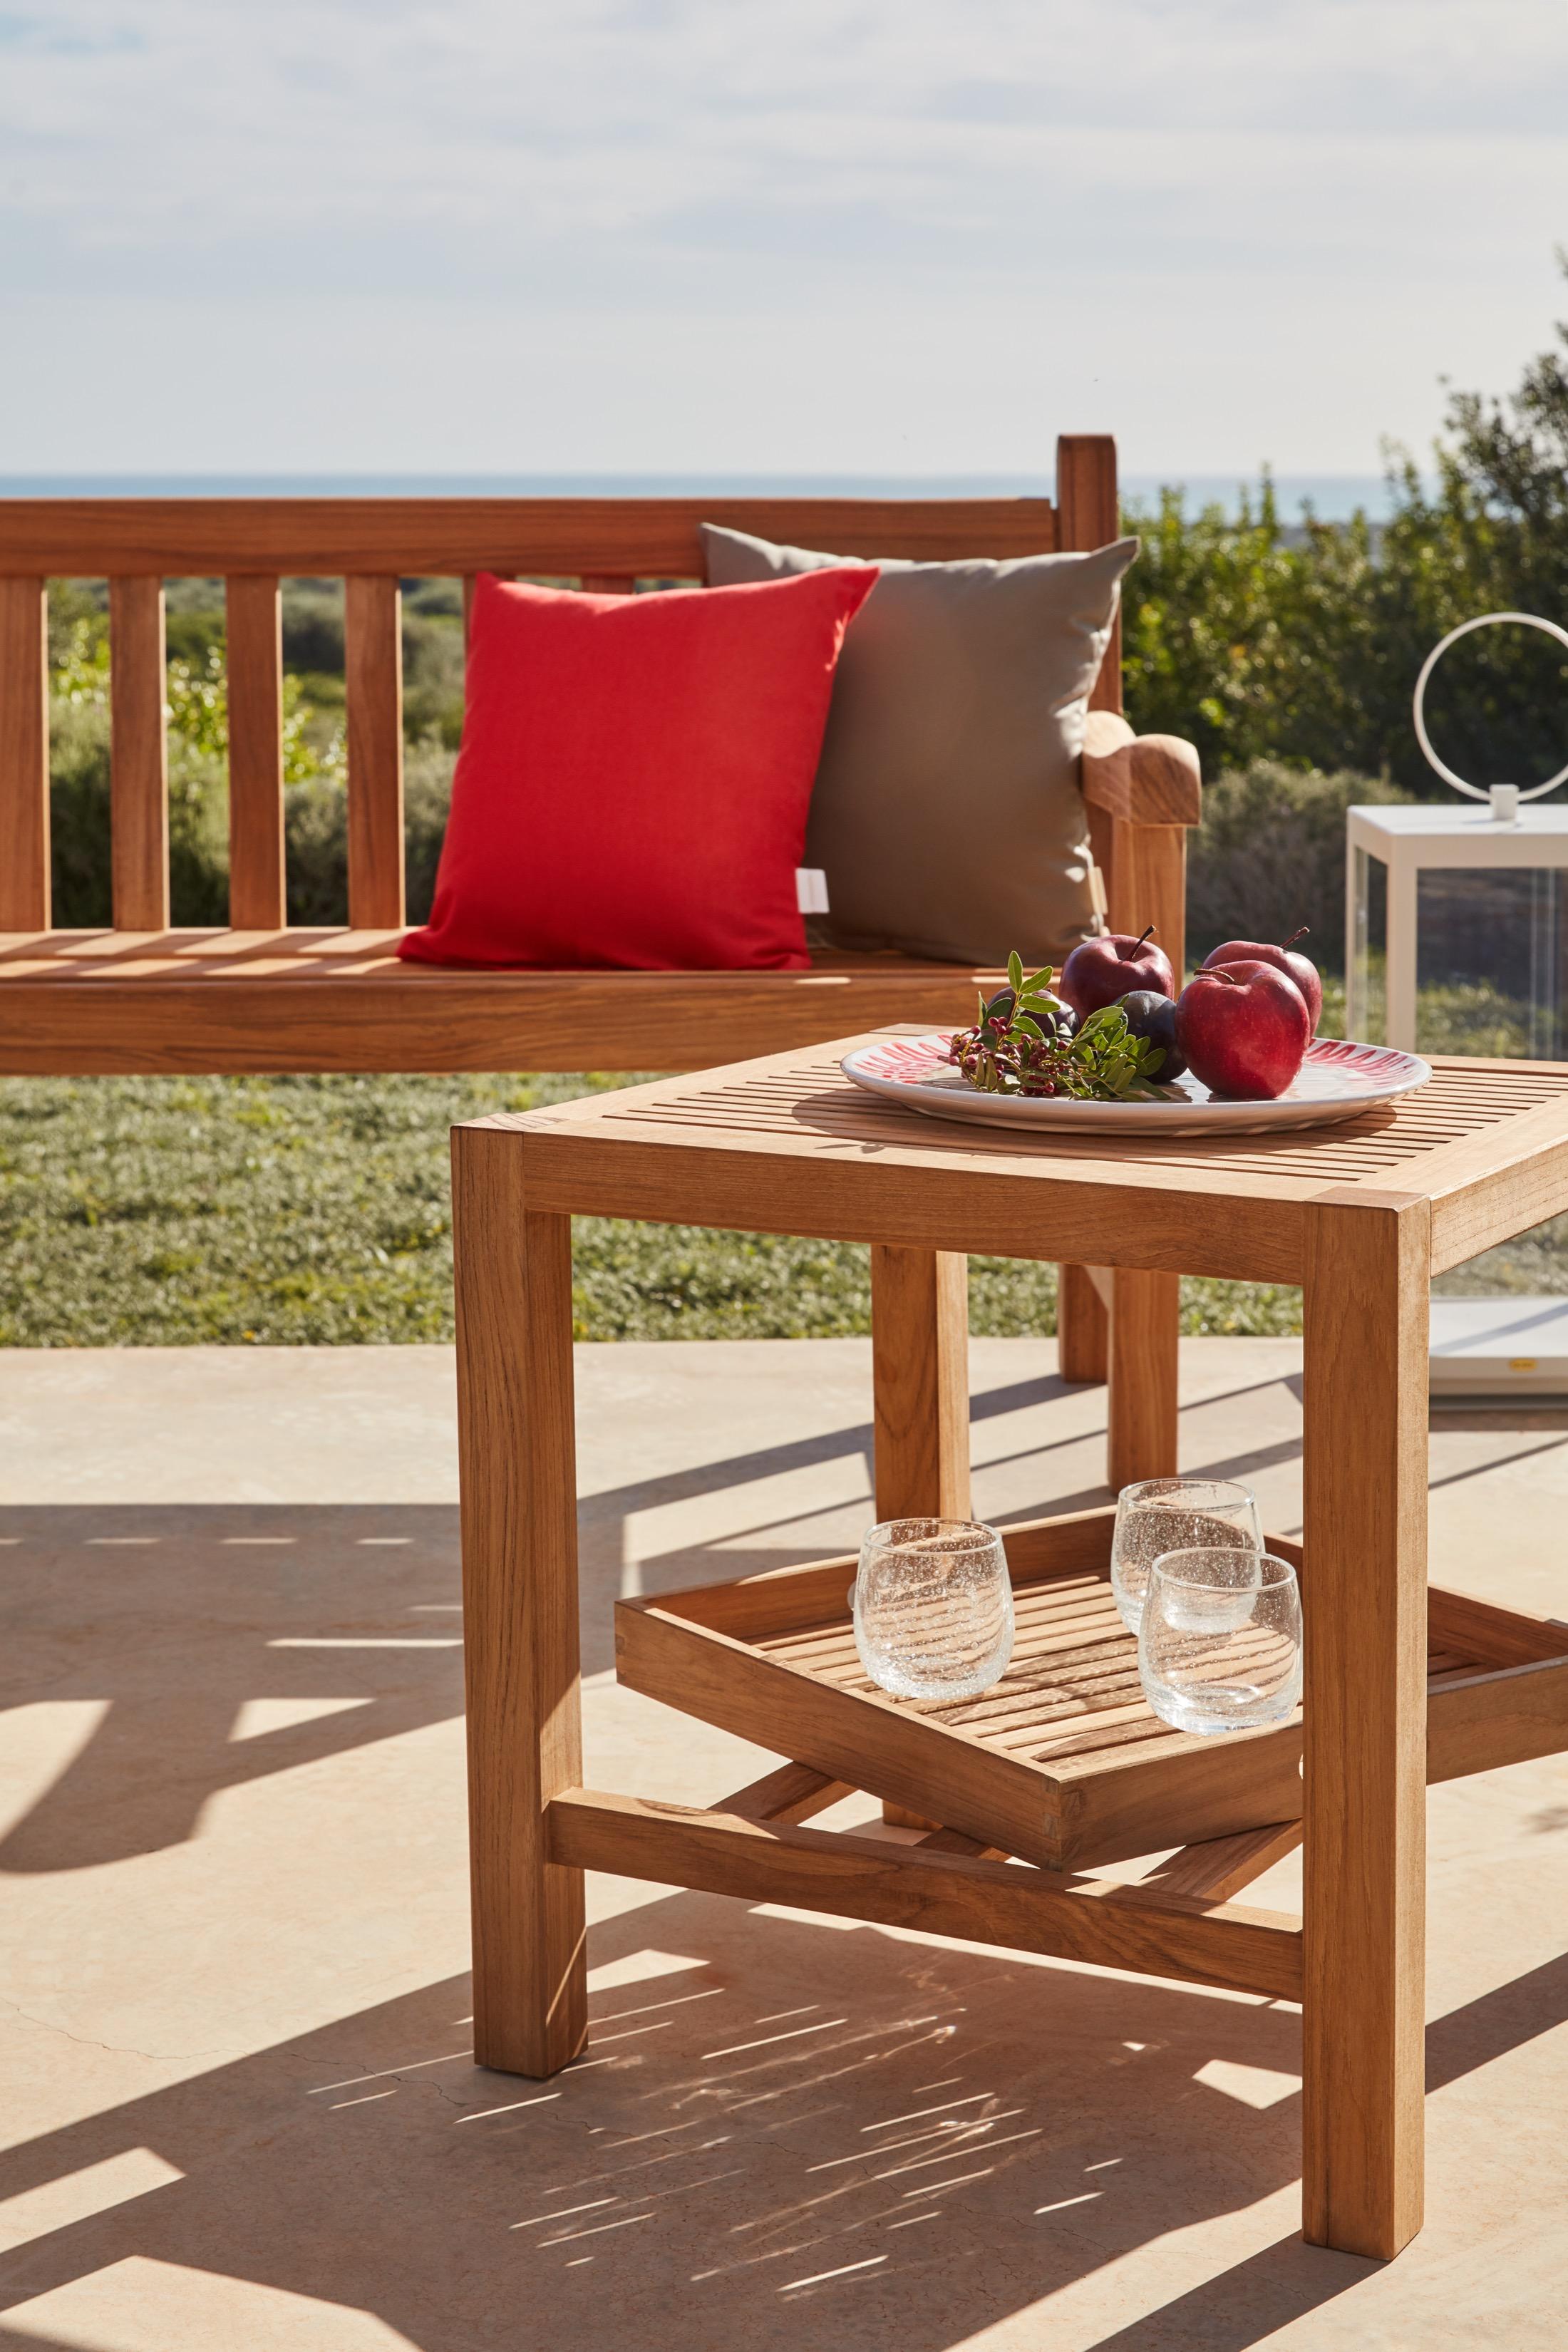 Wood Unopiu' Chelsea Coffee Table Square Outdoor Collection For Sale